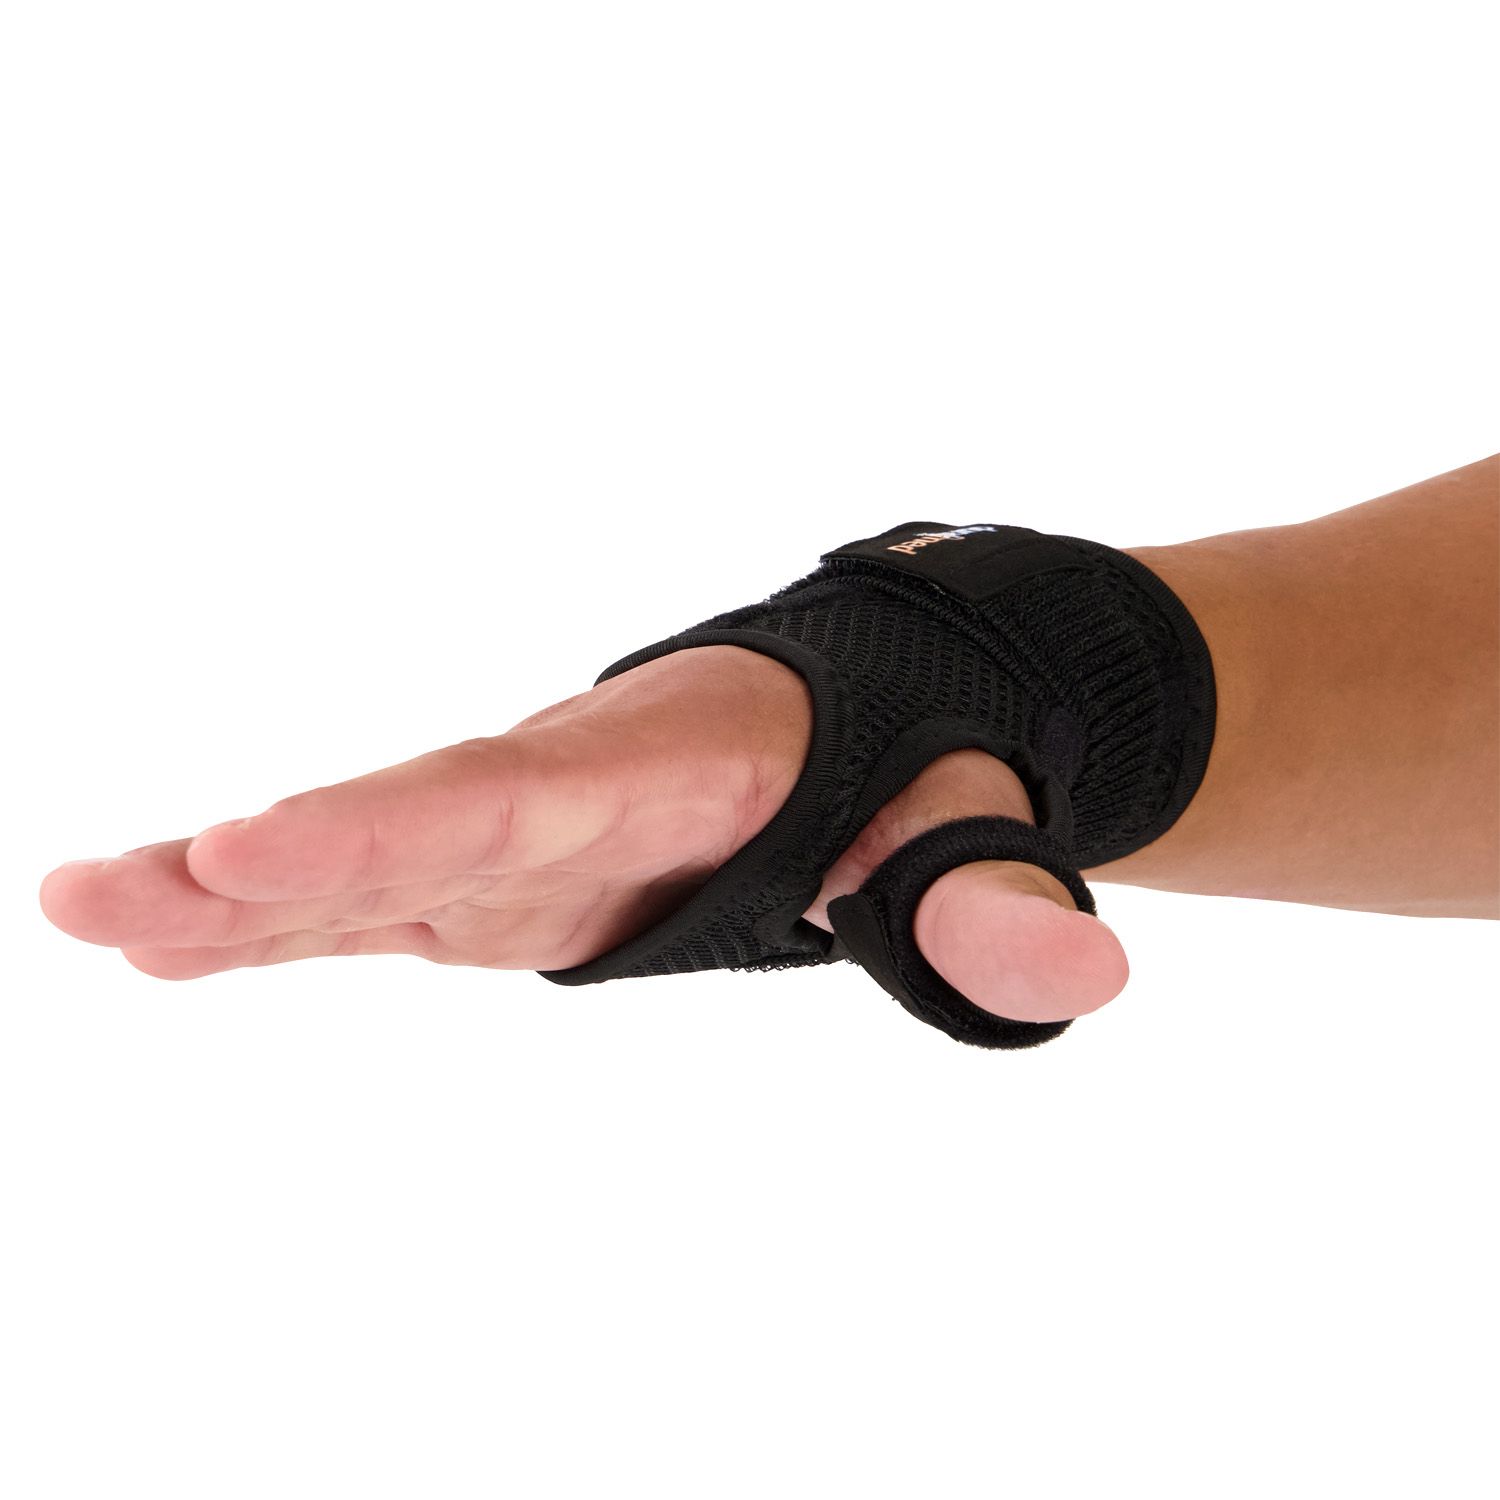 dunimed premium thumb wrist support product information